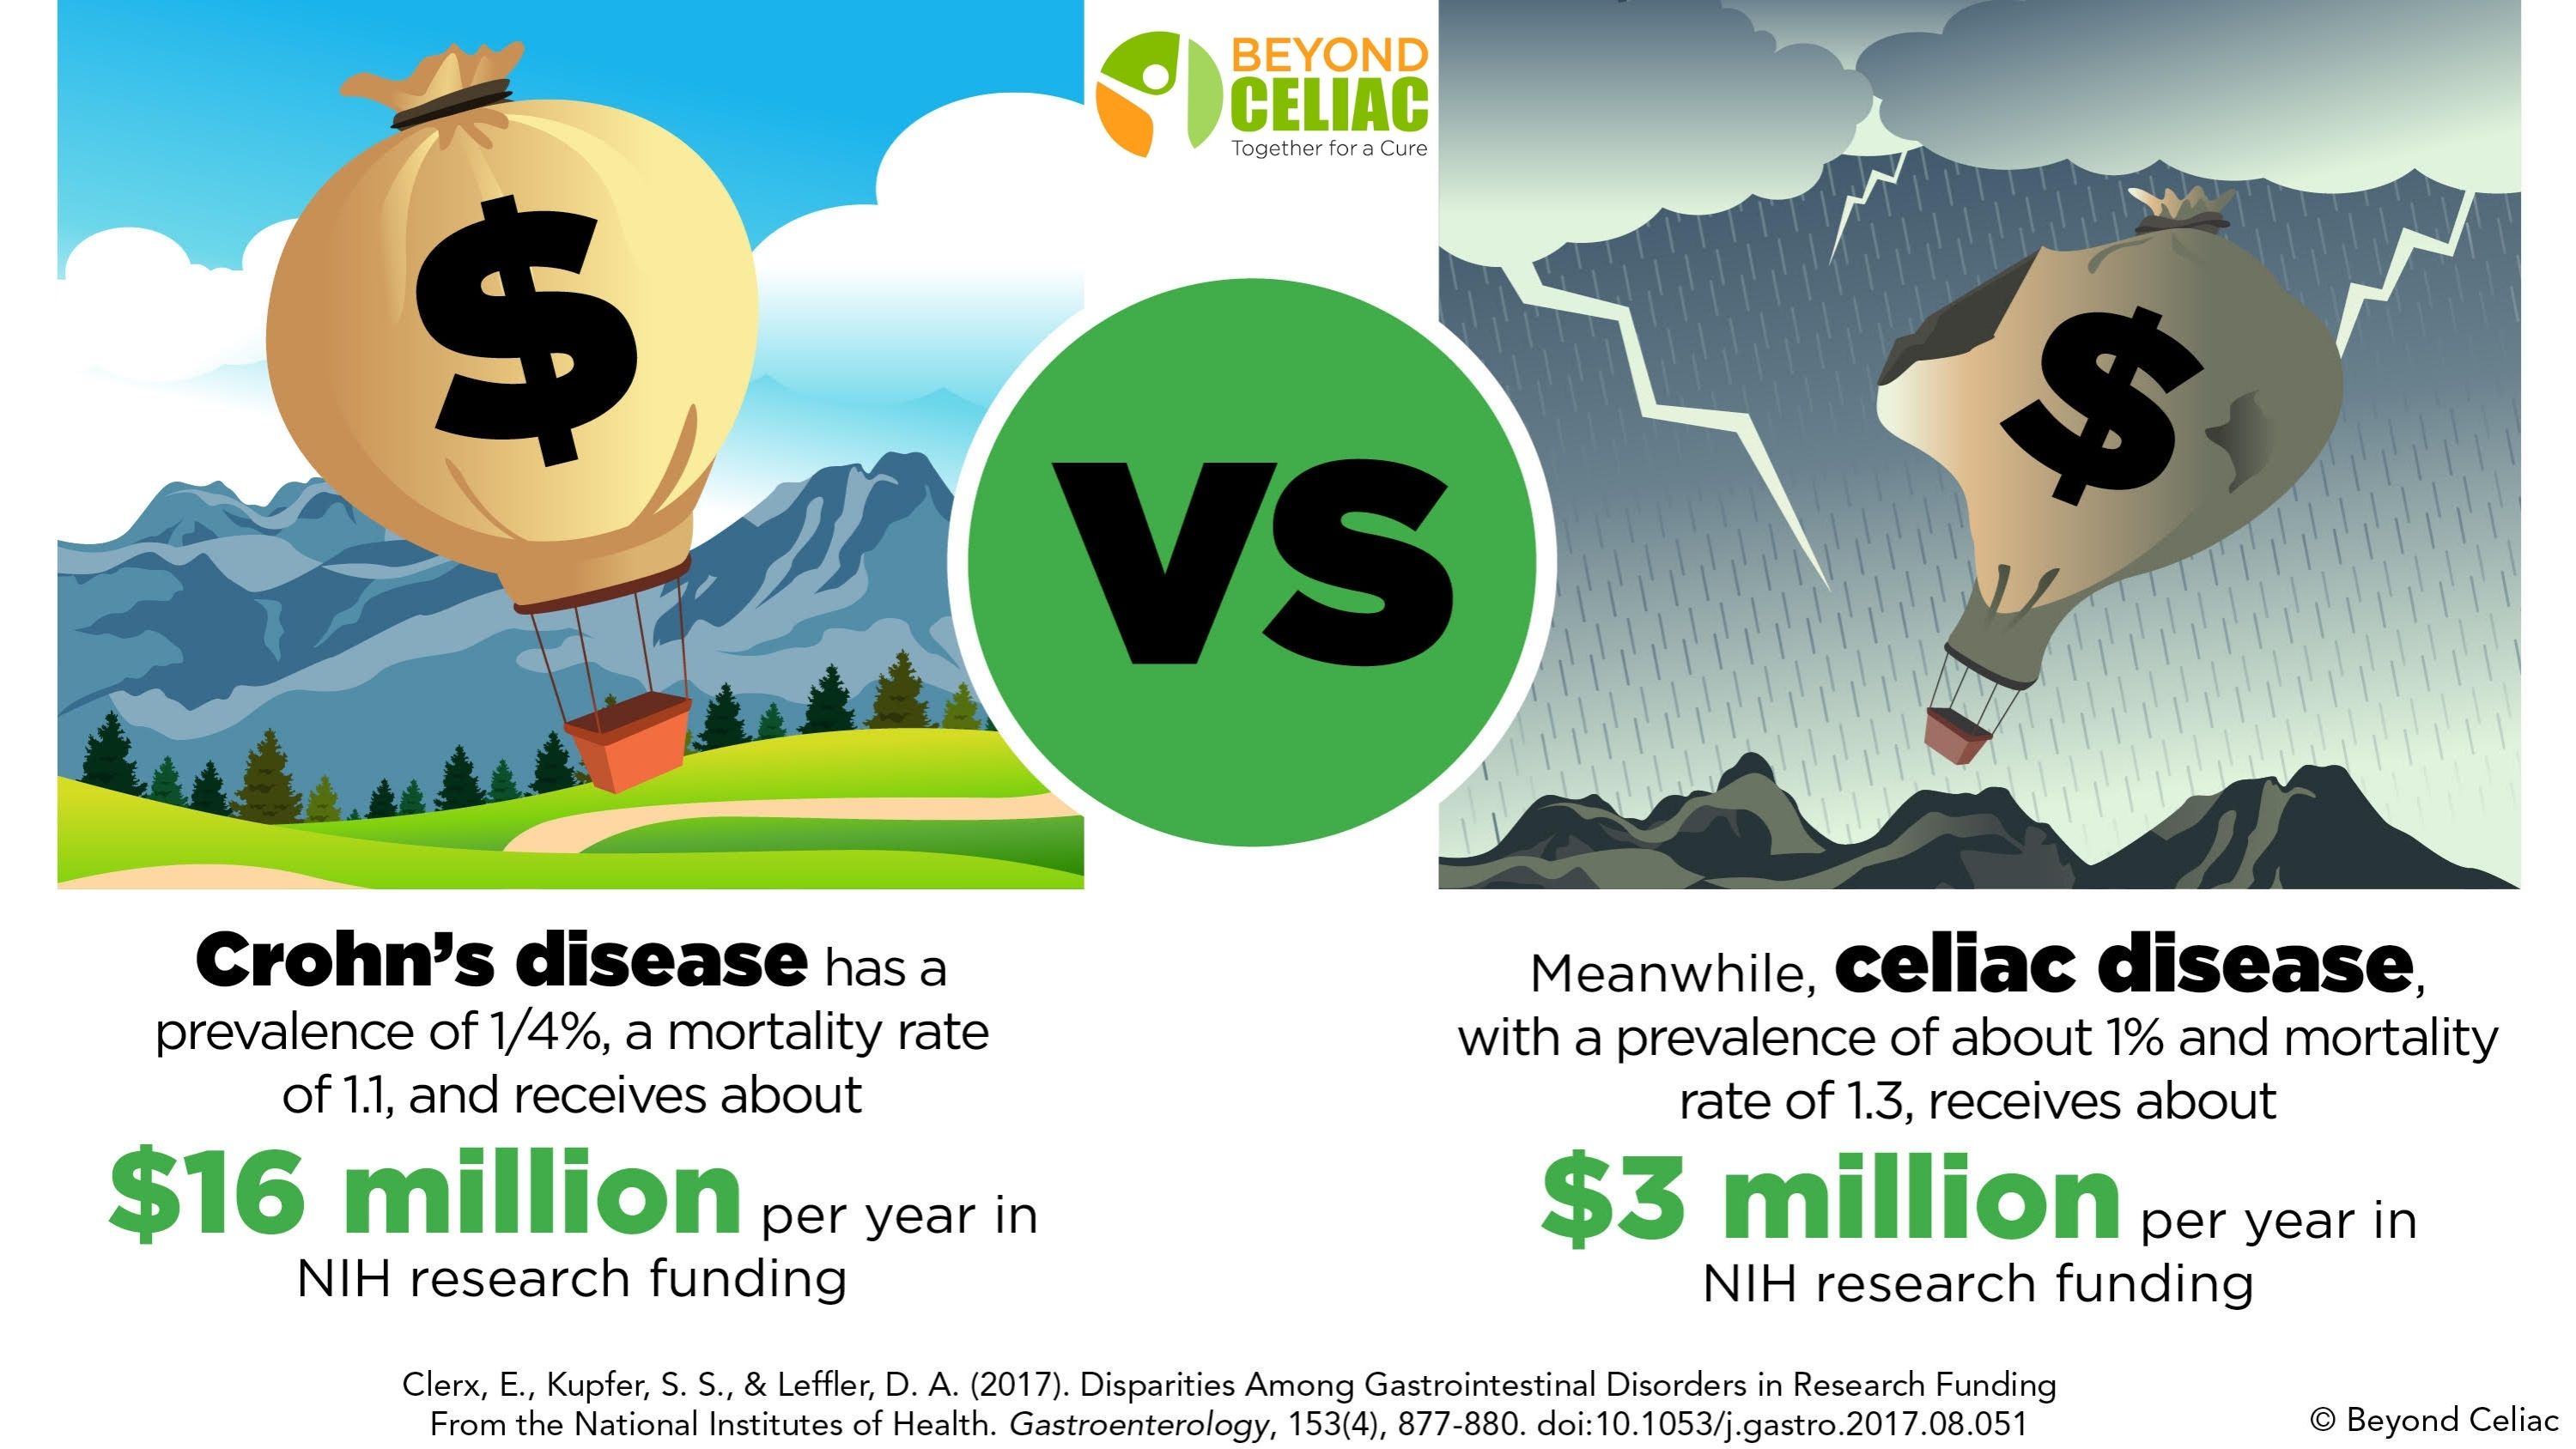 An infographic on the underfunding of celiac disease.